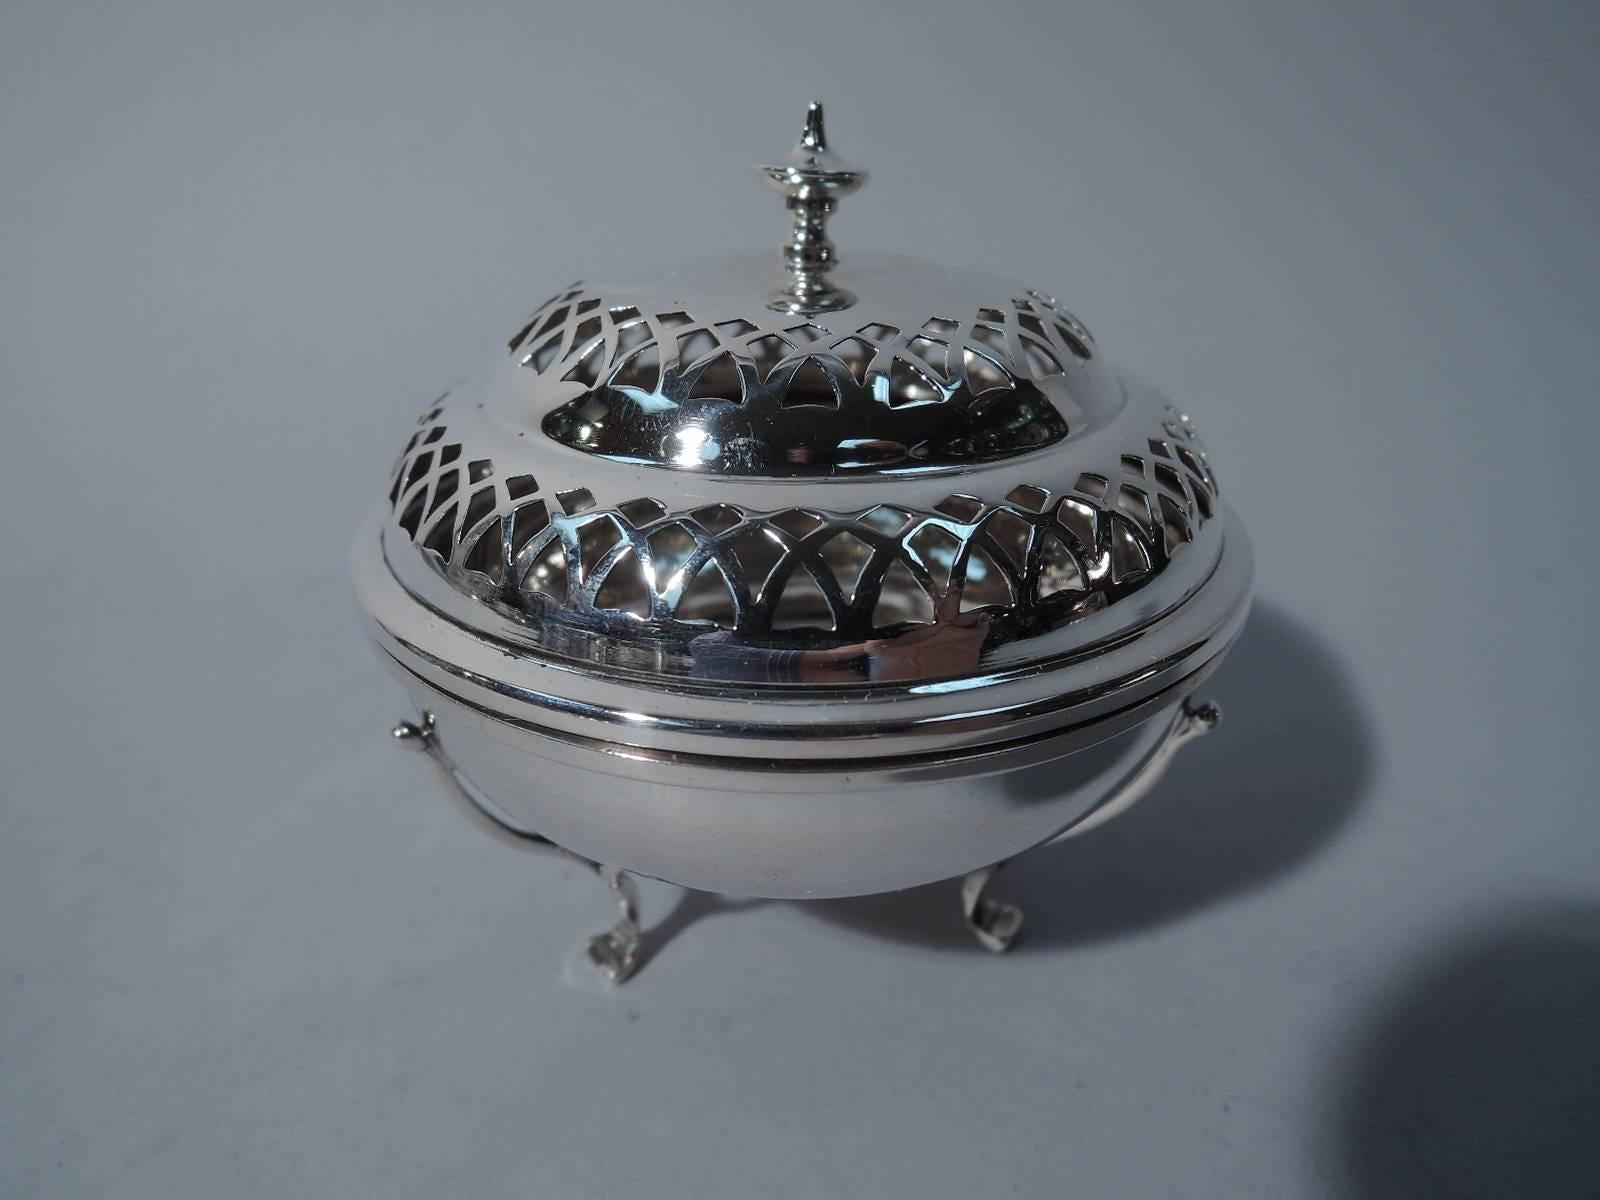 George V sterling silver censer. Made by Synyer & Beddoes in Birmingham in 1911. Curved and shallow bowl on three supports with elongated trefoil mounts. Double-dome cover has pierced arcades and ornamental finial. An elegant and old fashioned air